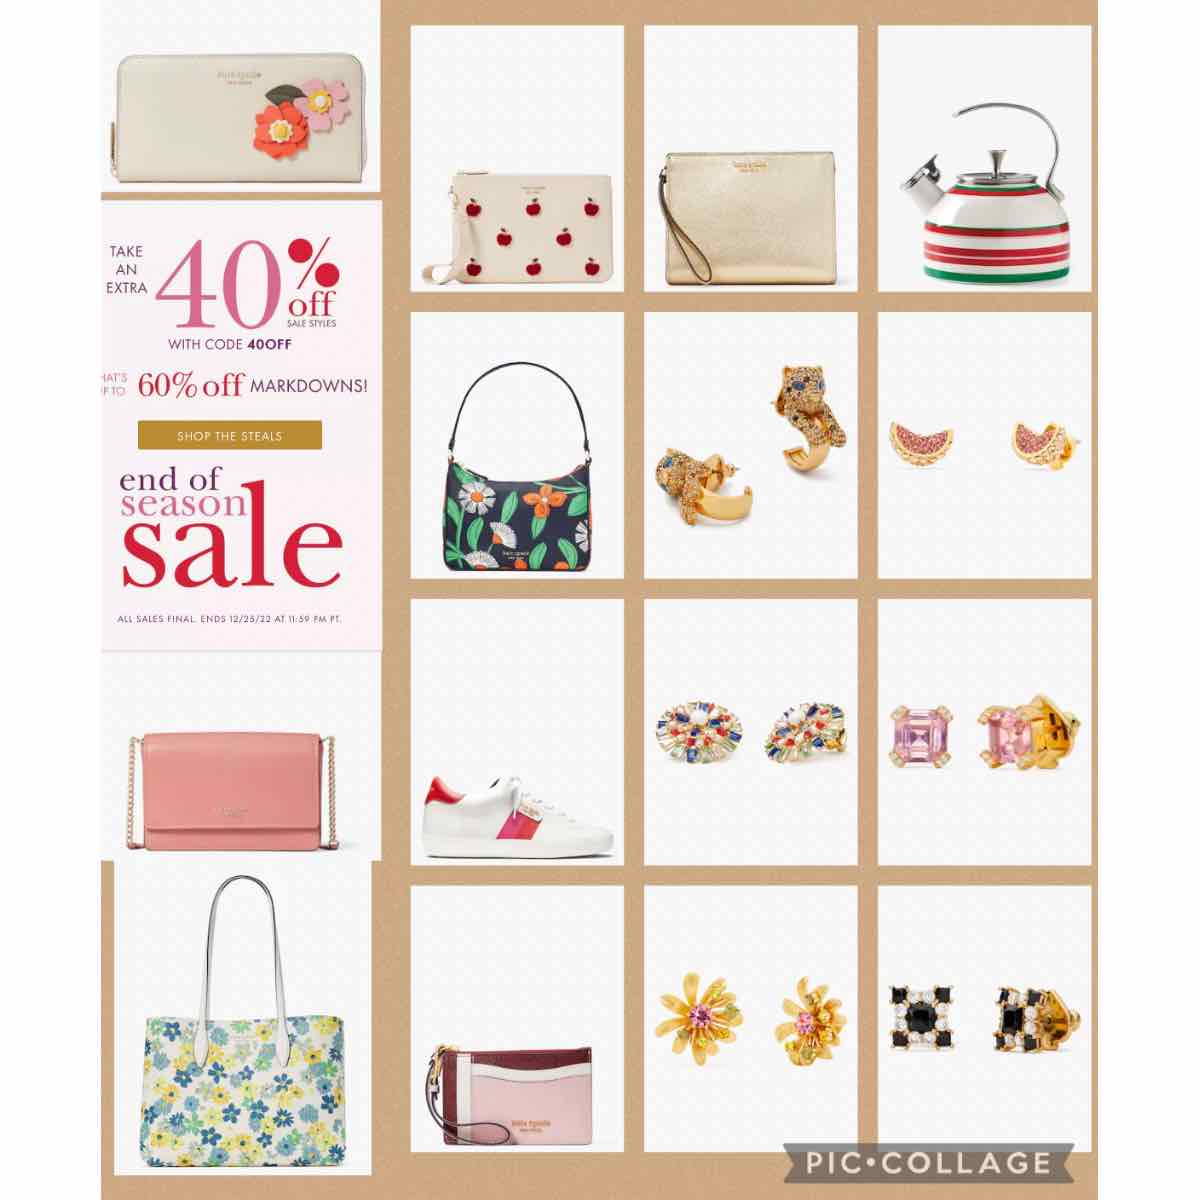 Extra 40% off clearance at Kate Spade and more deals for accessories |  Smart Savers